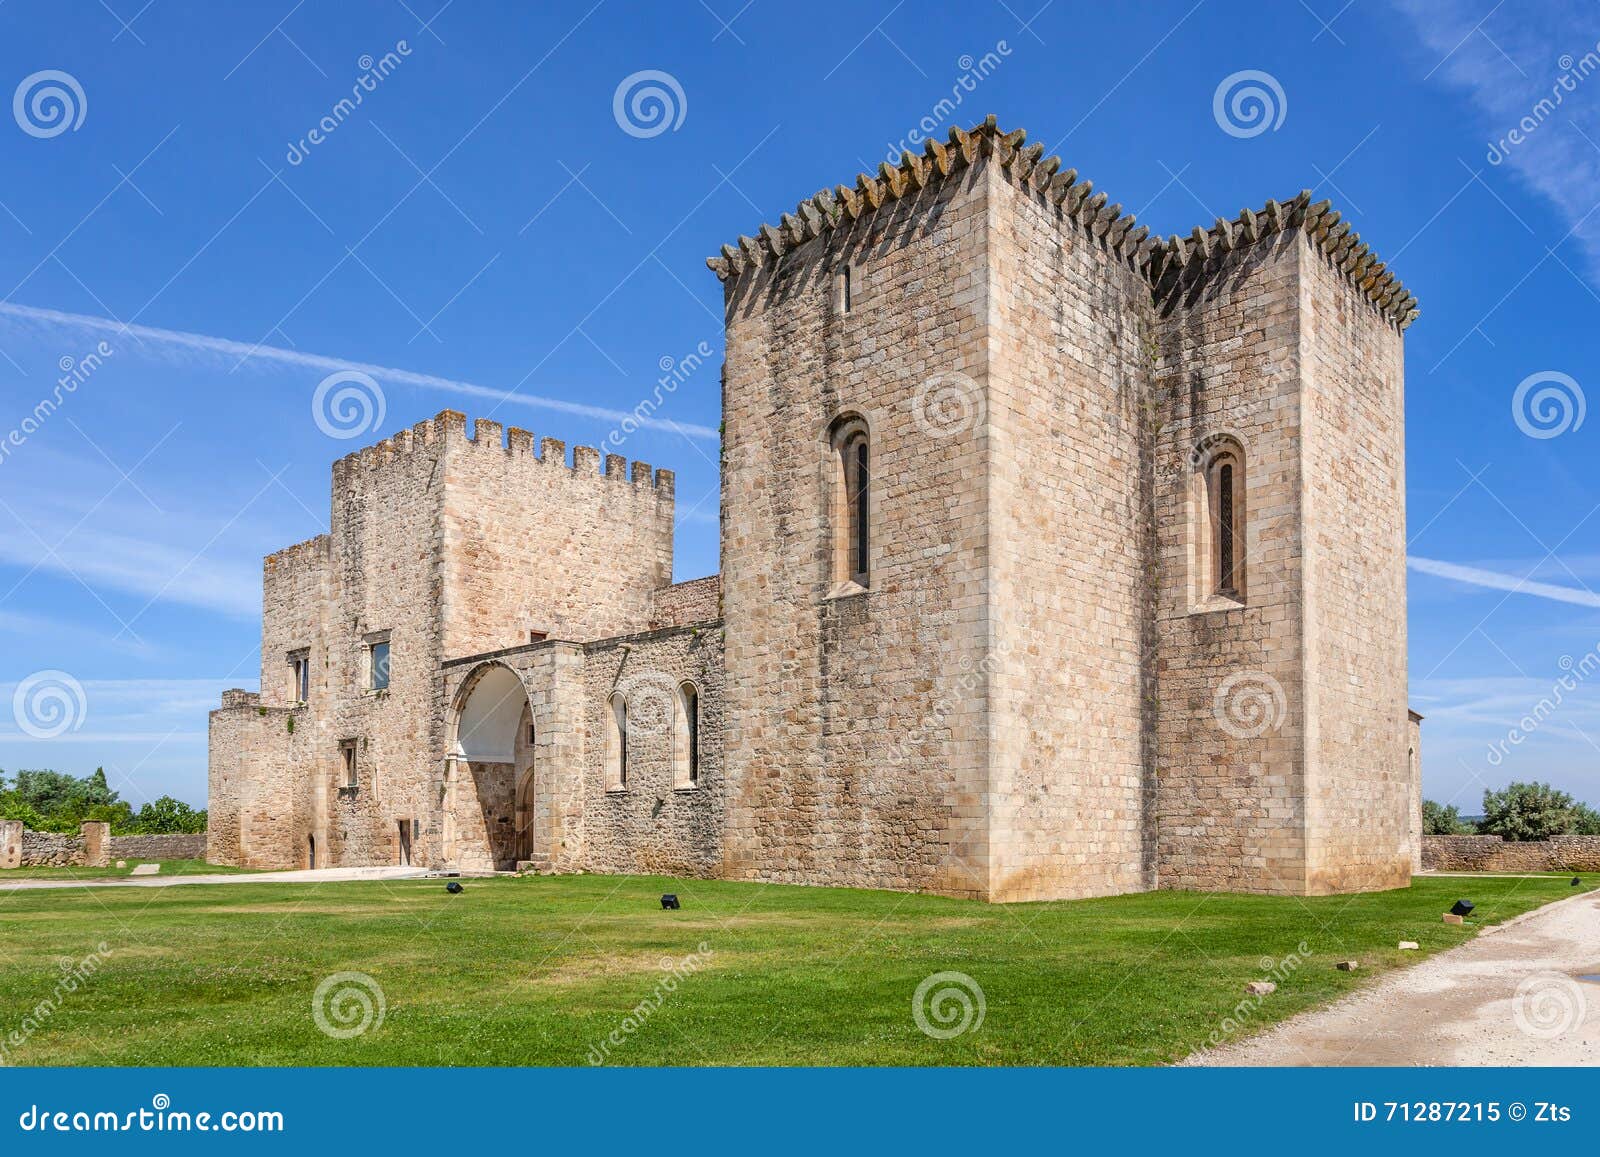 flor da rosa monastery in crato. belonged to the hospitaller knights